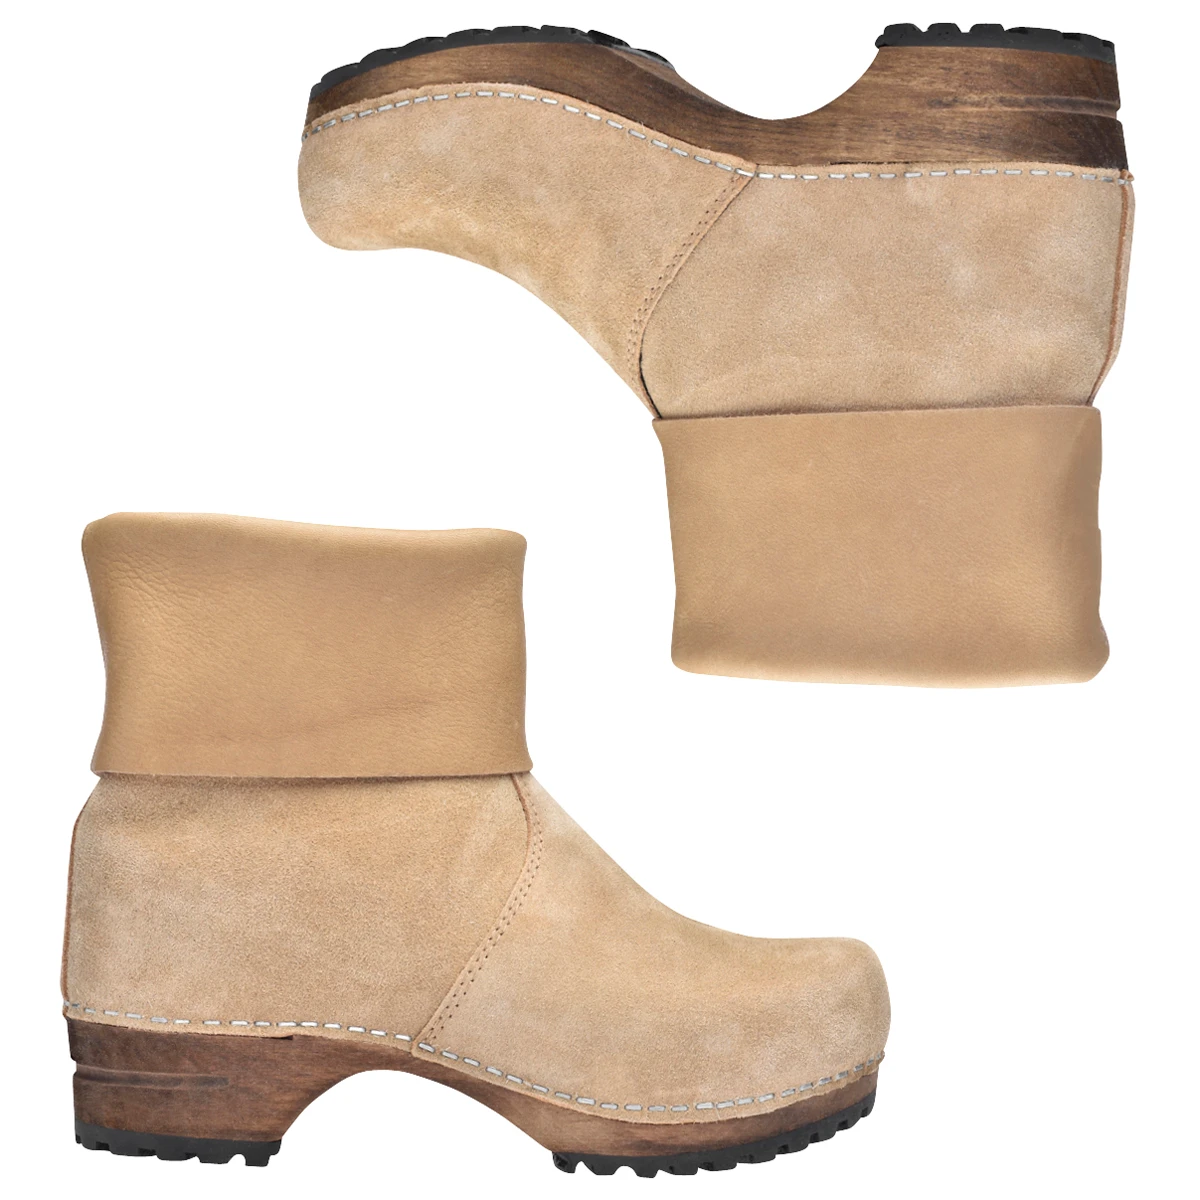 behagelig At forurene audition Clogs boots from Sanita - buy our delicious clogs here